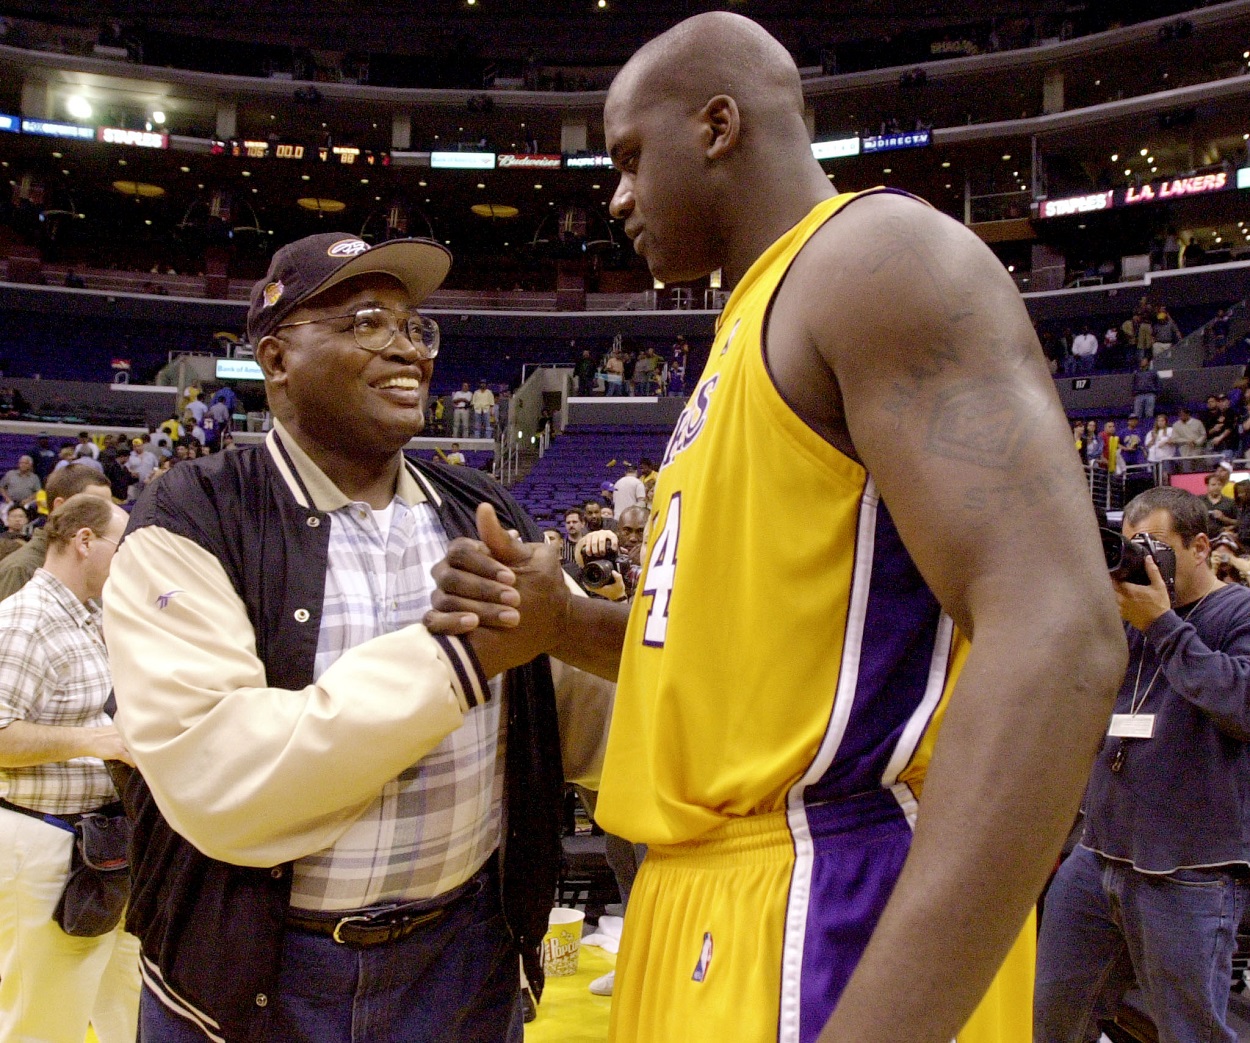 Former Lakers center Shaquille O'Neal embraces his stepdad after an NBA game.